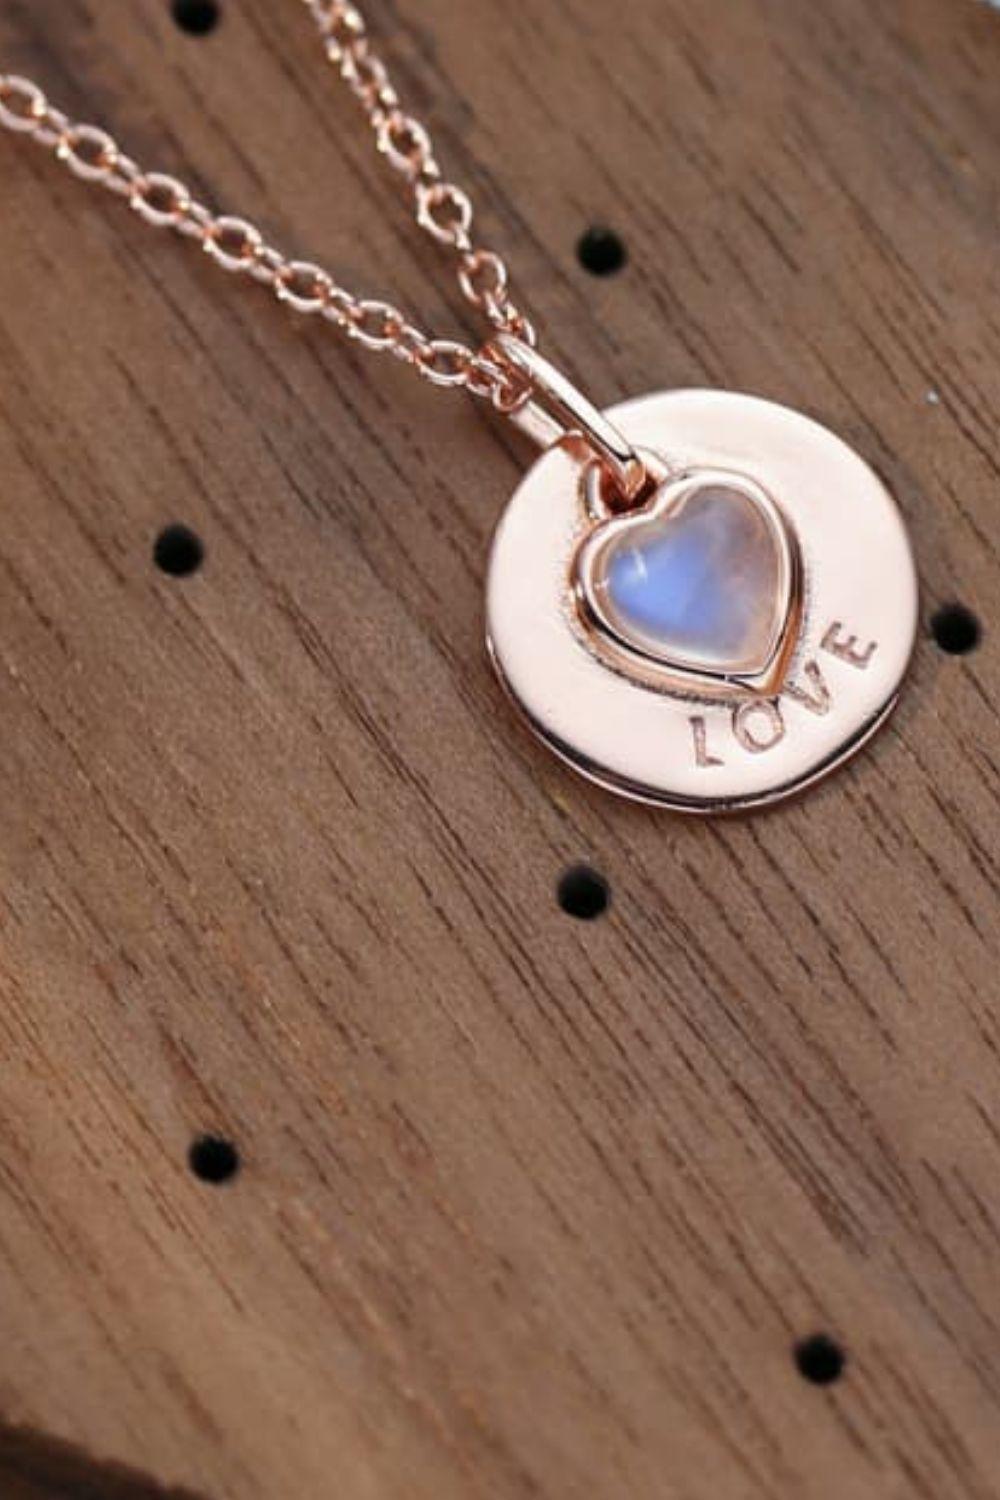 Moonstone LOVE Heart Pendant 925 Sterling Silver Necklace - God's Girl Gifts And Apparel